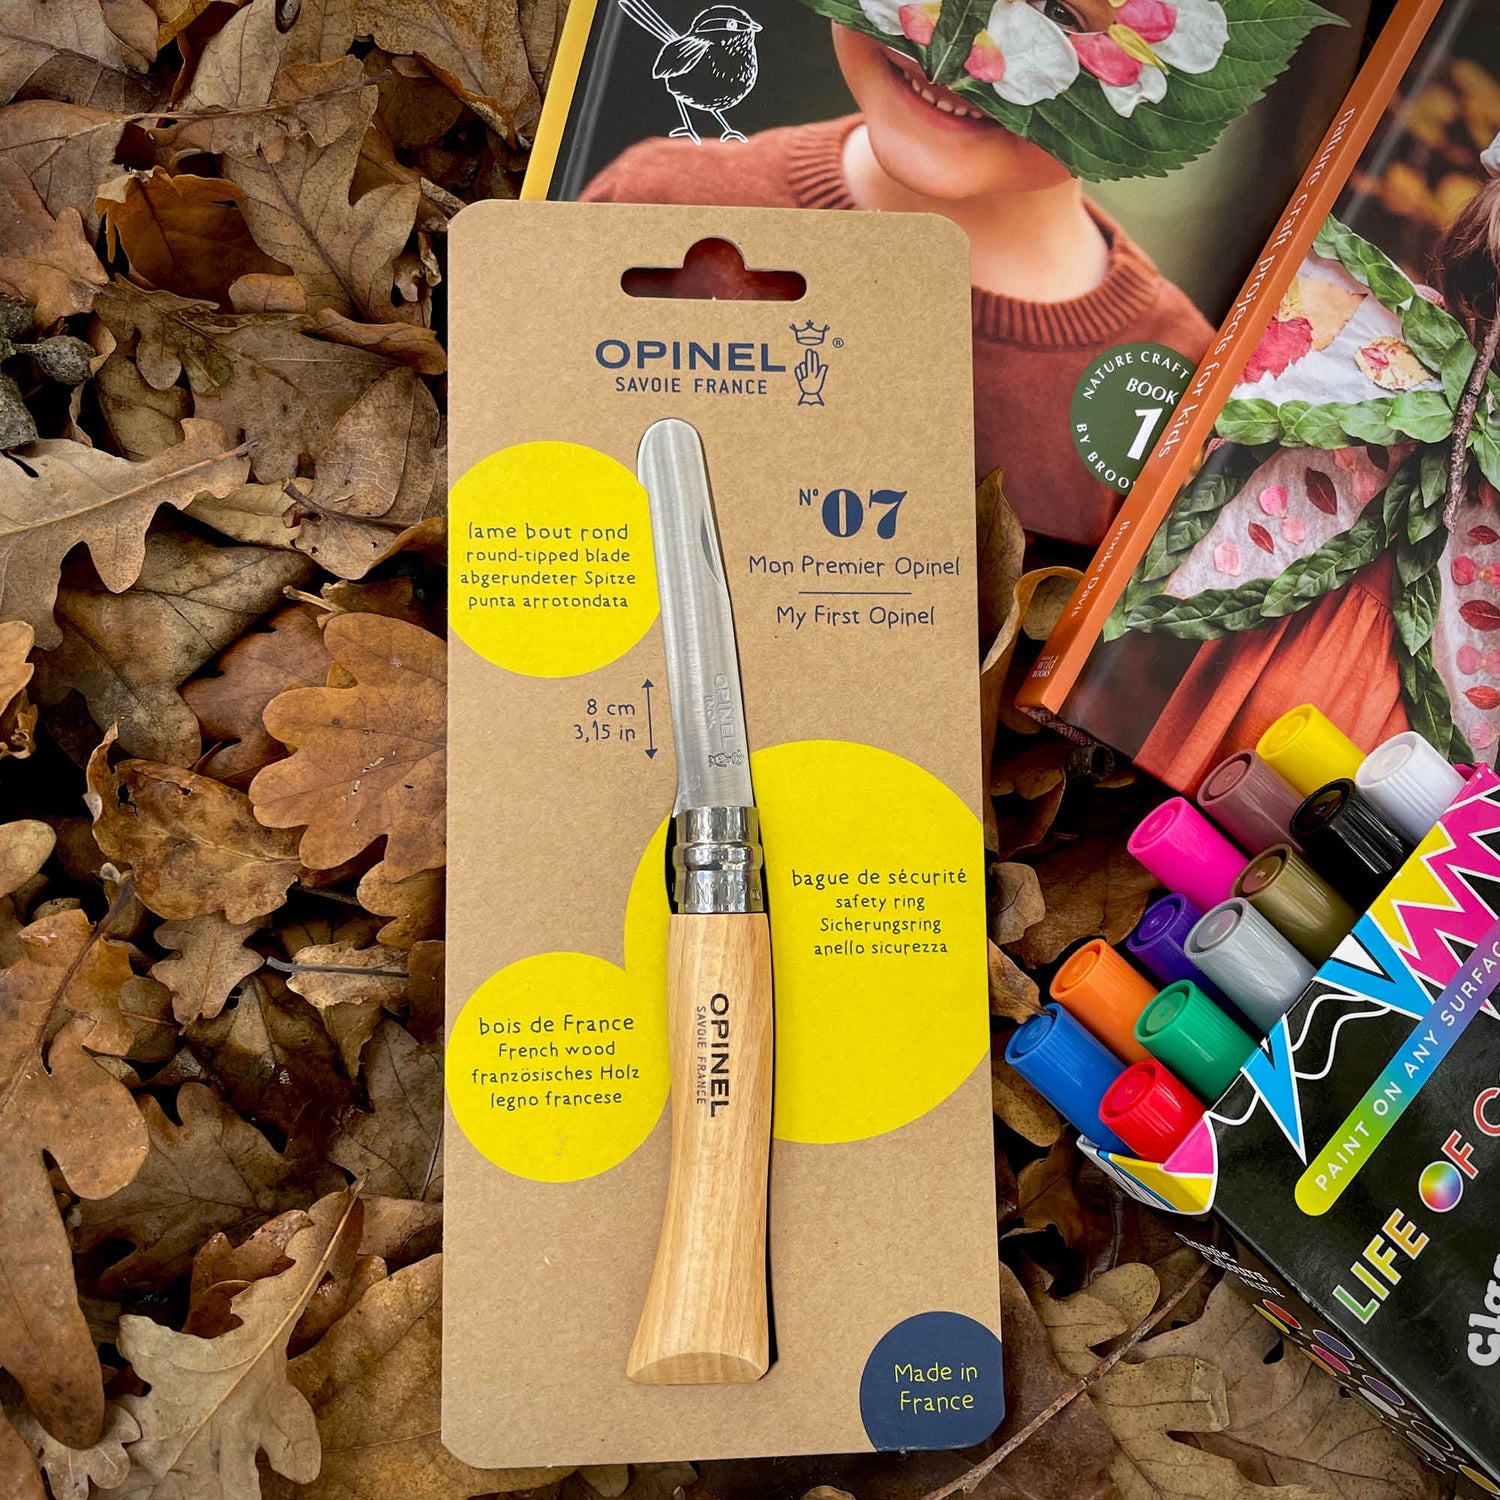 Nature Craft Starter Pack from Your Wild Books includes Wild Imagination book, Wild Child book, paint pens in classic colours and an opinel beginners whittling knife. Save 20%